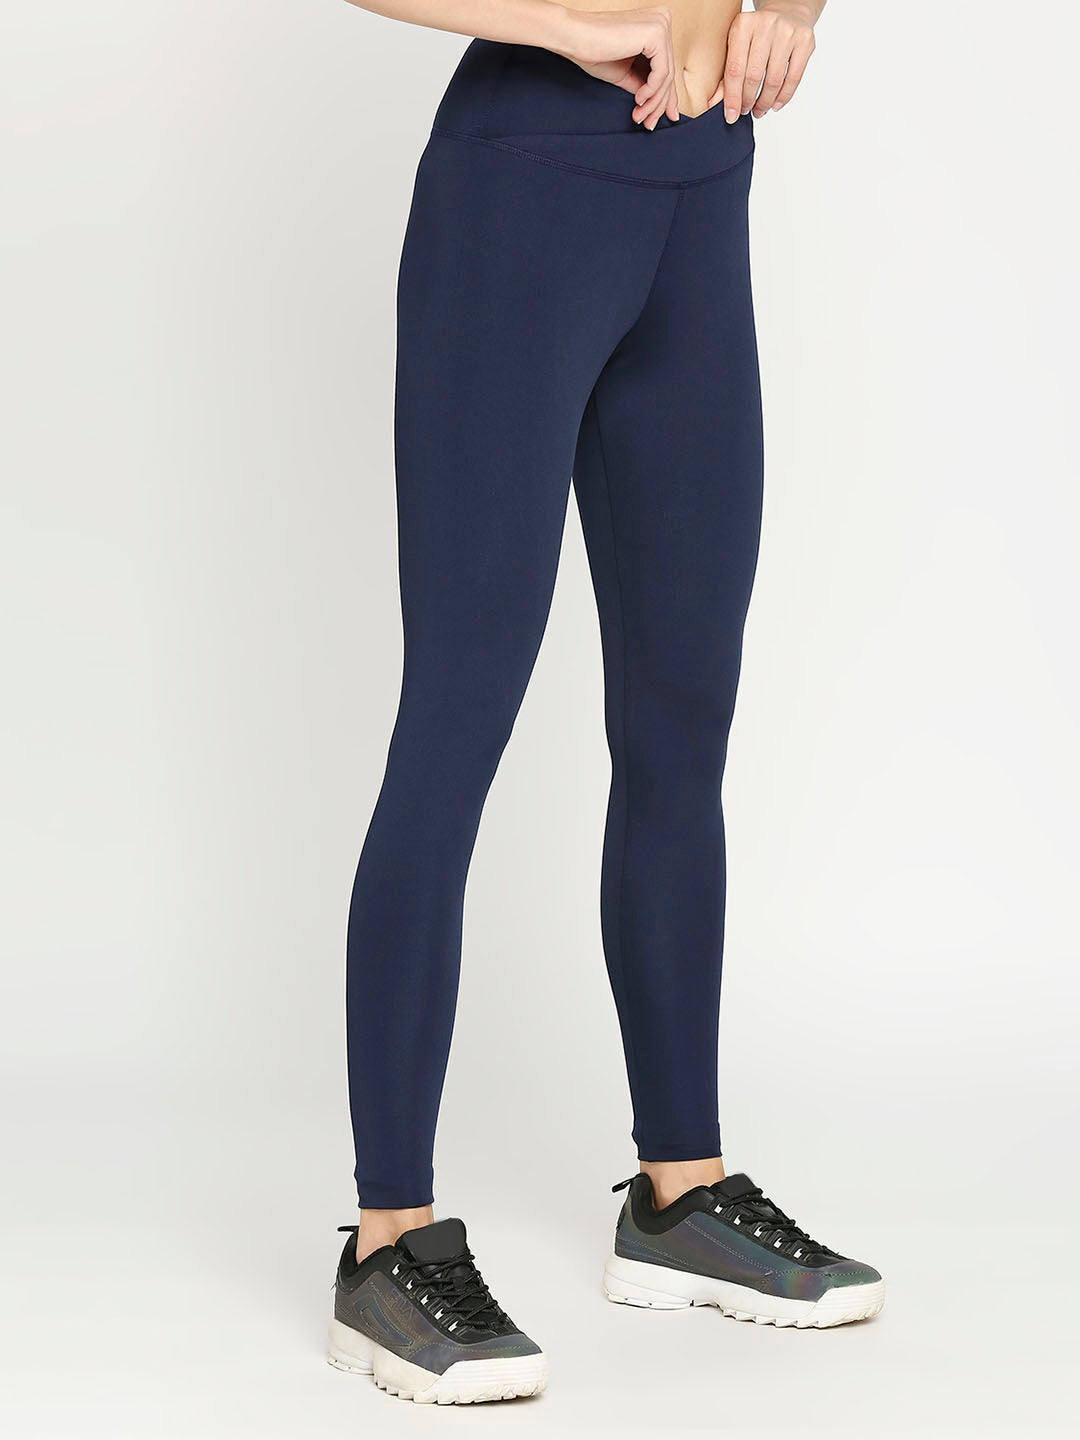 Buy Only Blue Slim Fit Tights for Women Online @ Tata CLiQ